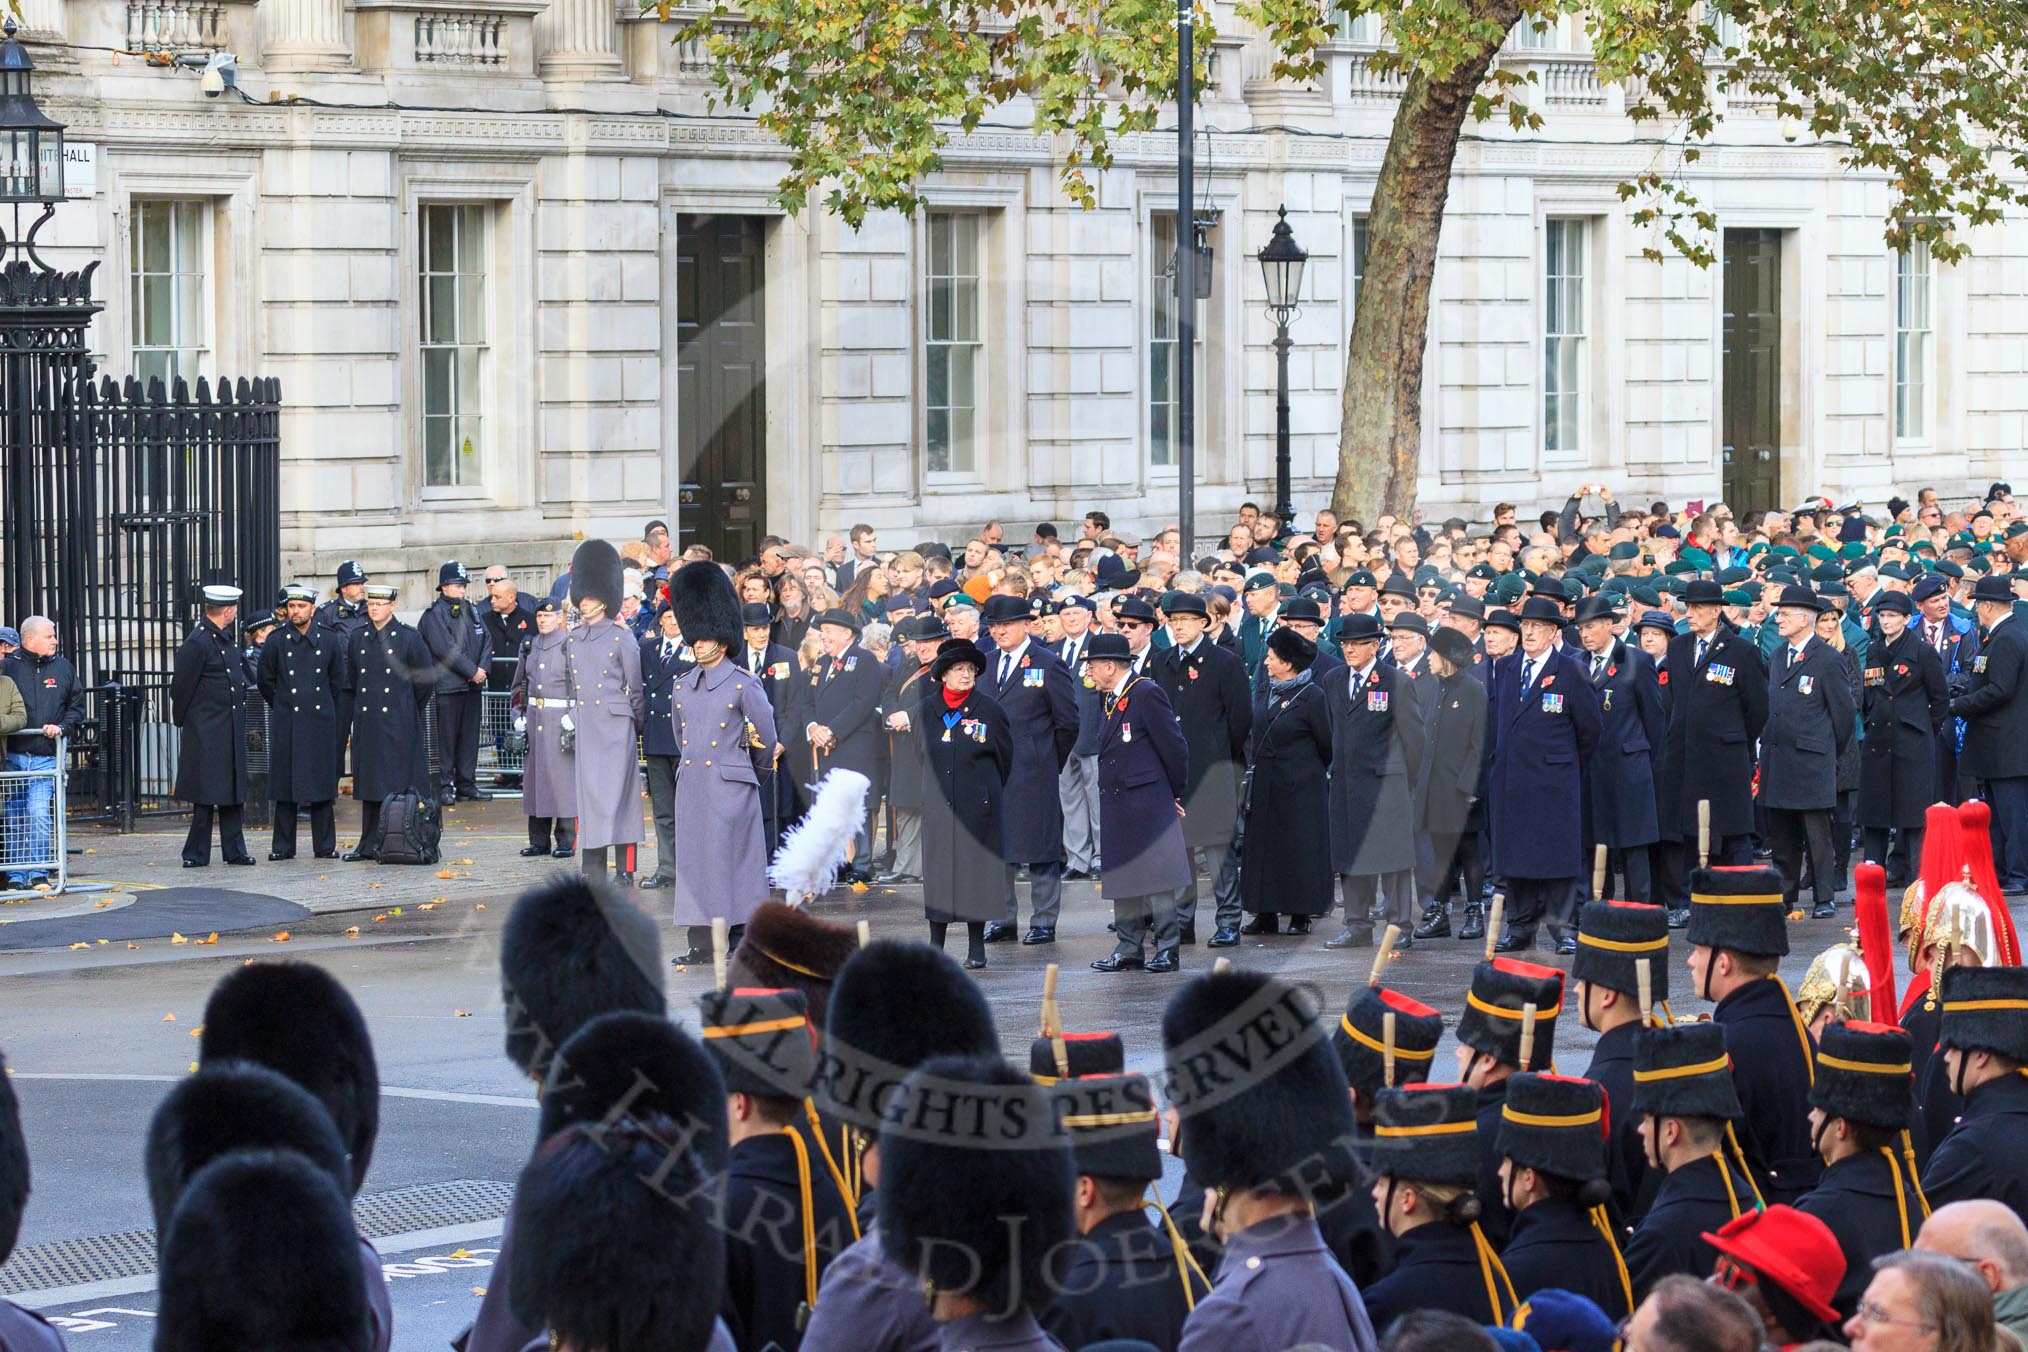 The first groups of the March Past are in place near Downing Street corner on Whitehall before the Remembrance Sunday Cenotaph Ceremony 2018 at Horse Guards Parade, Westminster, London, 11 November 2018, 10:30. In front the Service detachment from the King's Troop Royal Horse Artillery and Service detachment from the Household Cavalry.